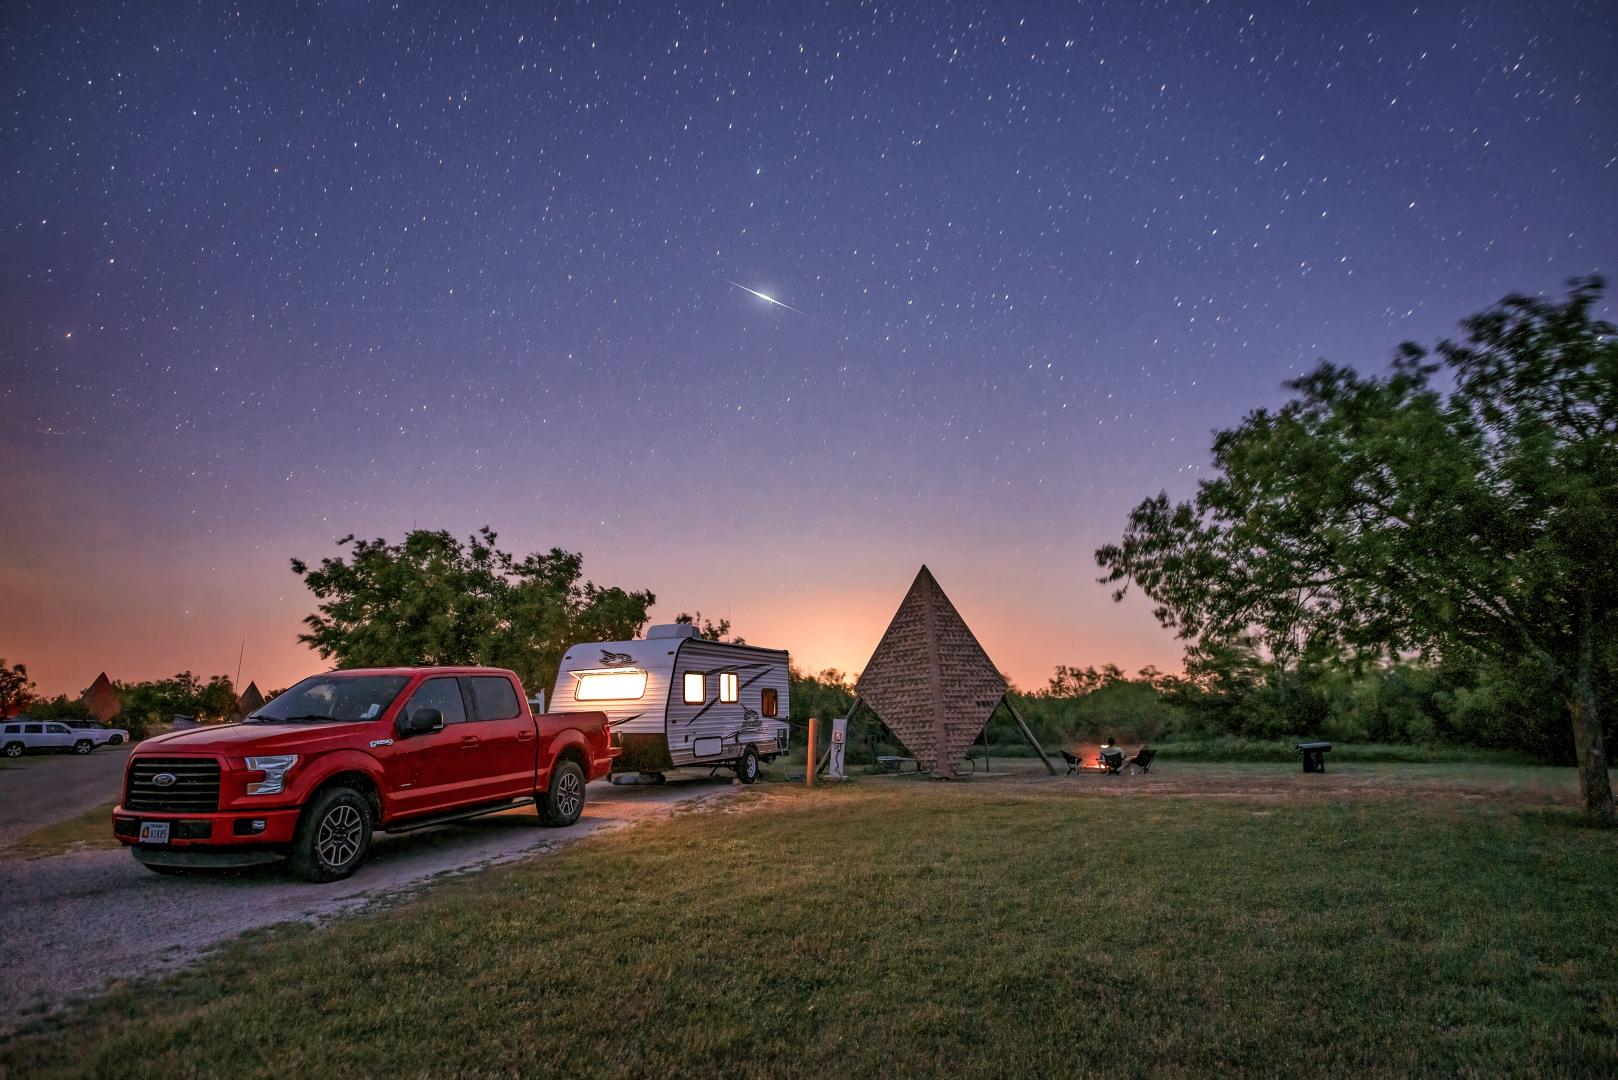 Why You Should Stay Up Late When Camping